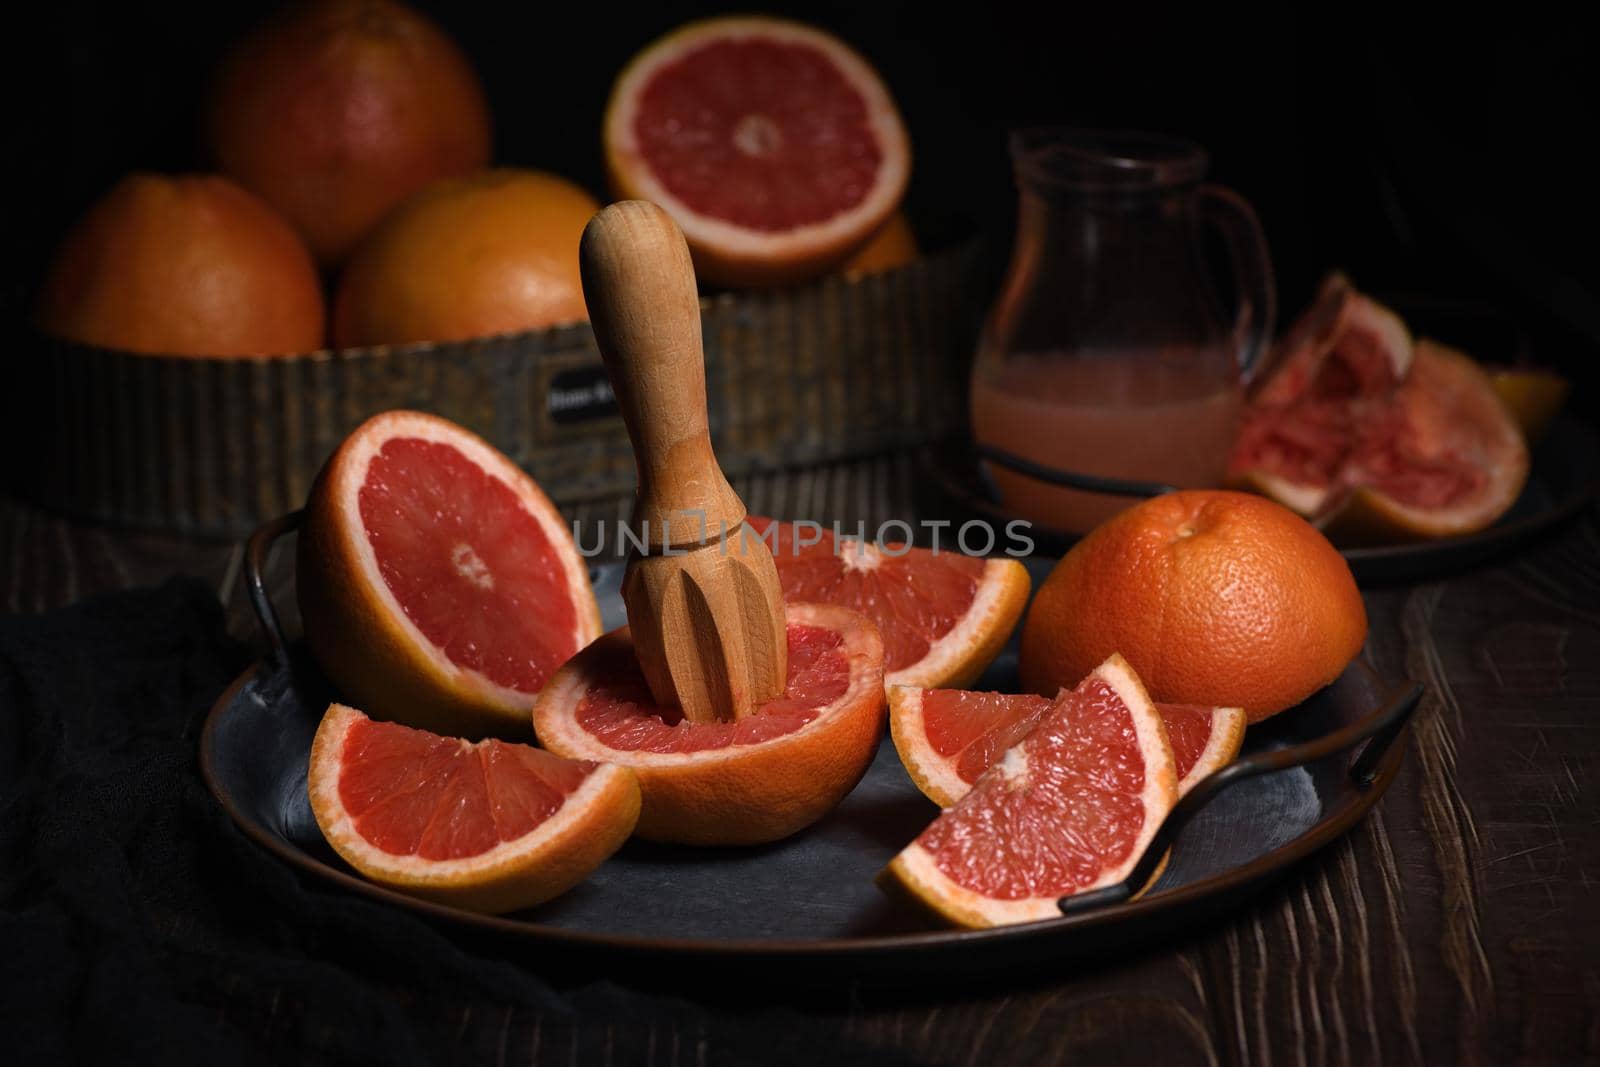   Juicer  squeezing juice from grapefruit by Apolonia